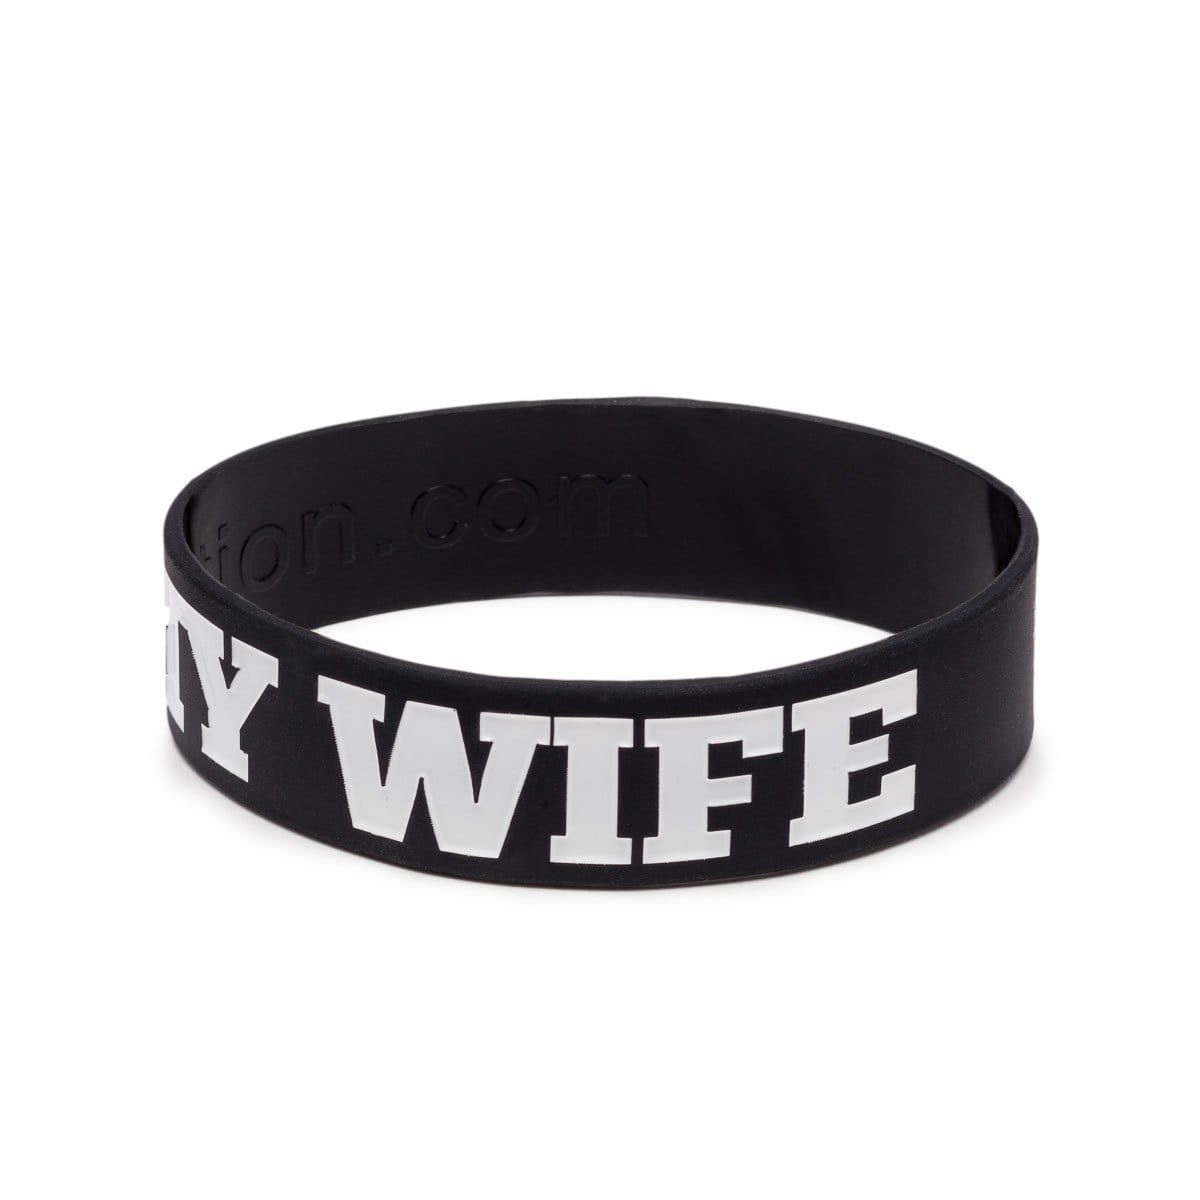 3:16 Collection Jewelry I Love My Wife Wristband